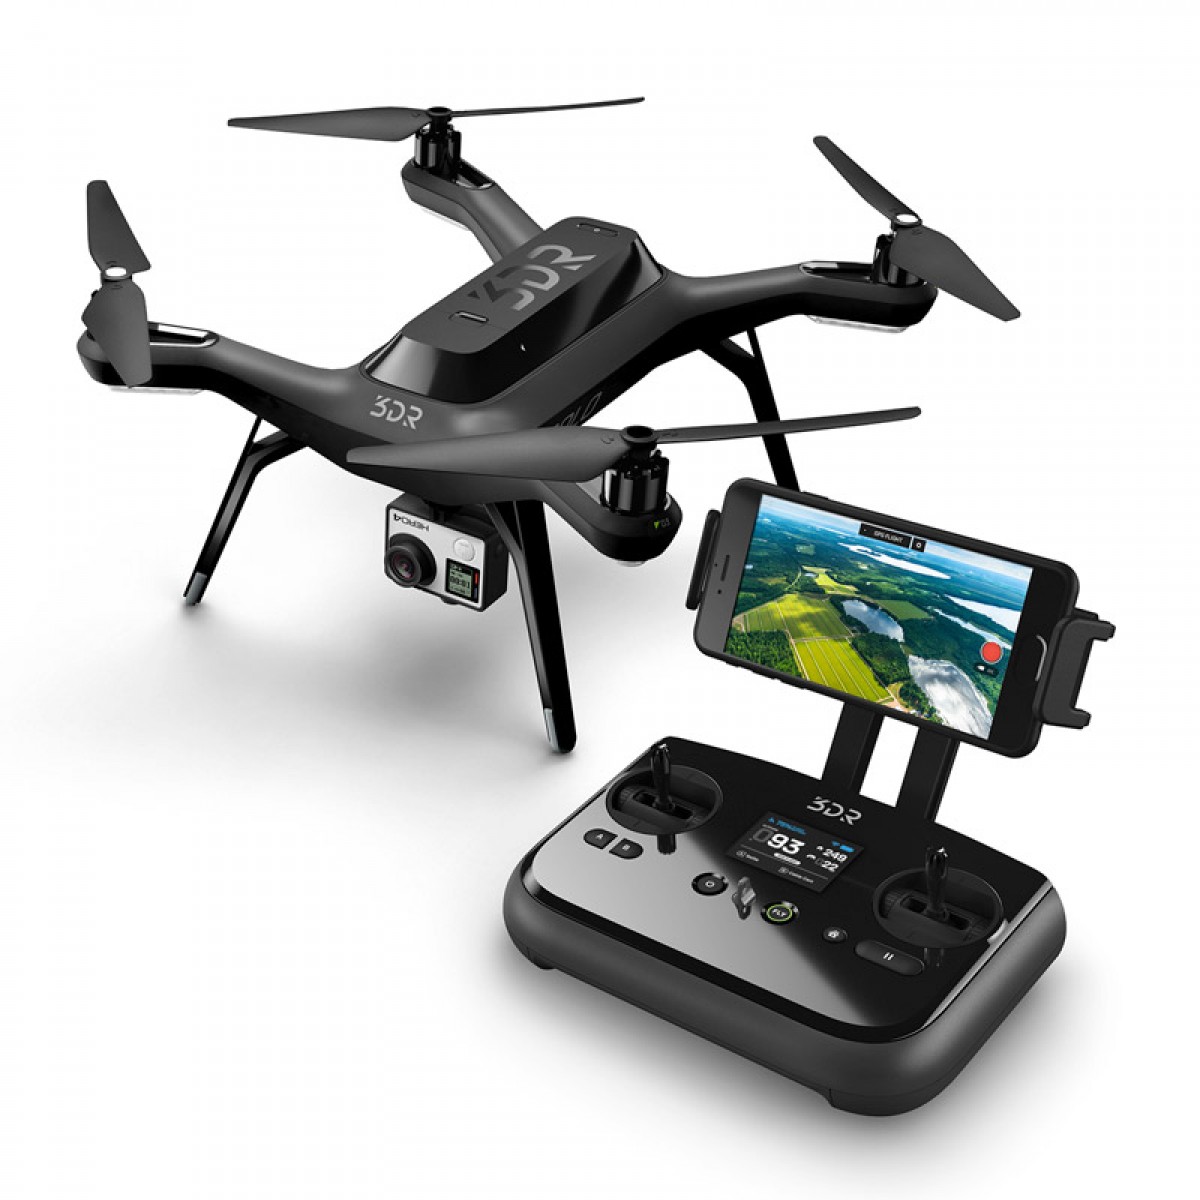 3DR Solo Smart Drone – The Smartest of the Drones